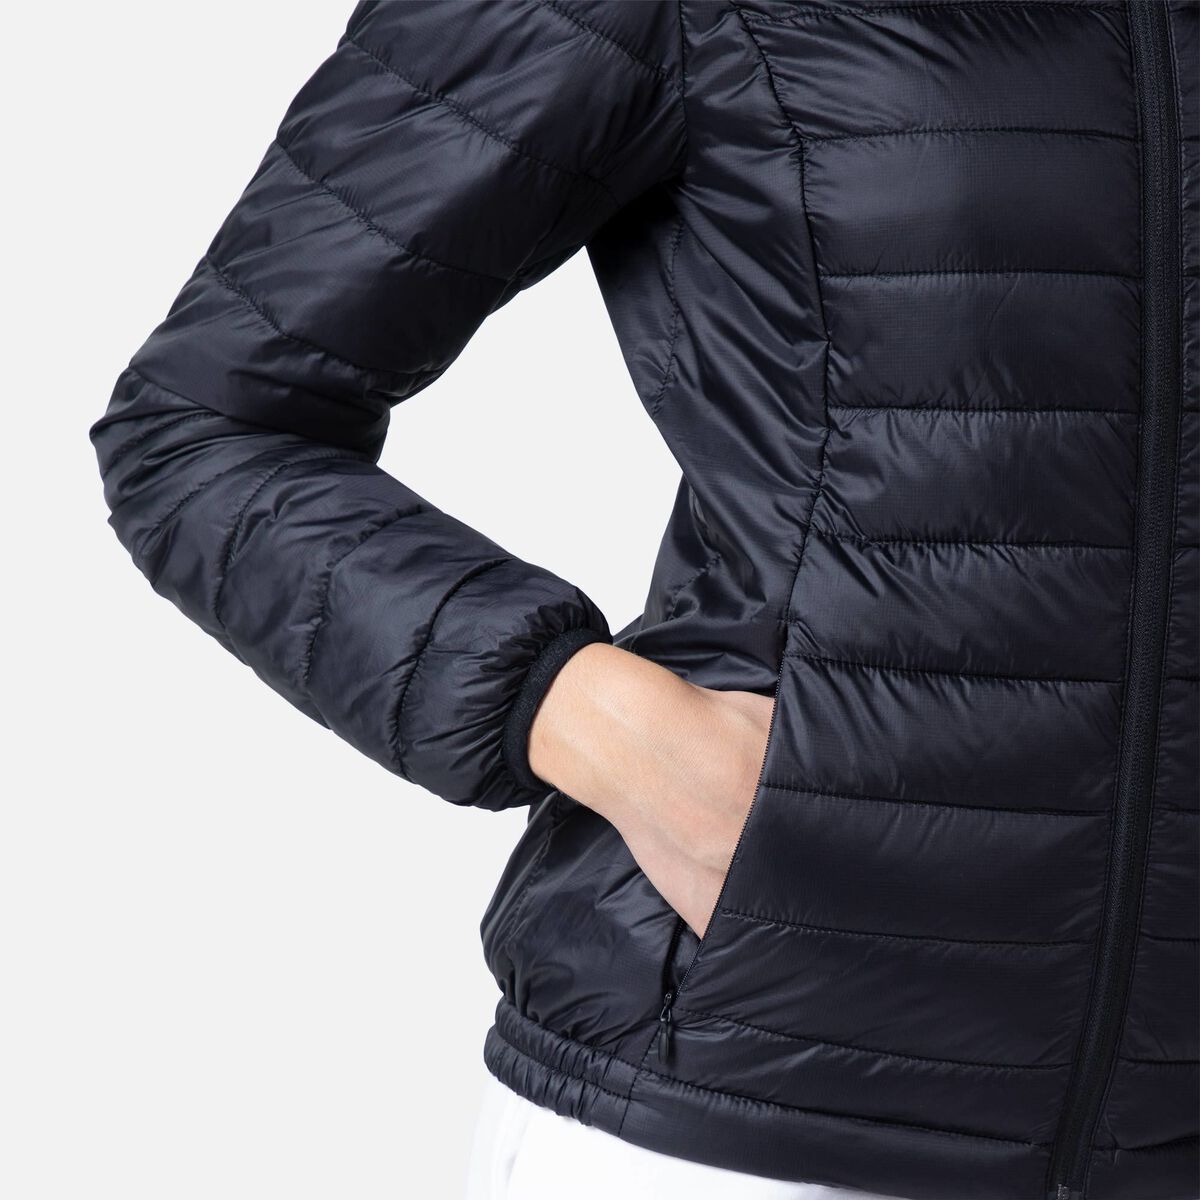 Women's hooded insulated jacket 180GR